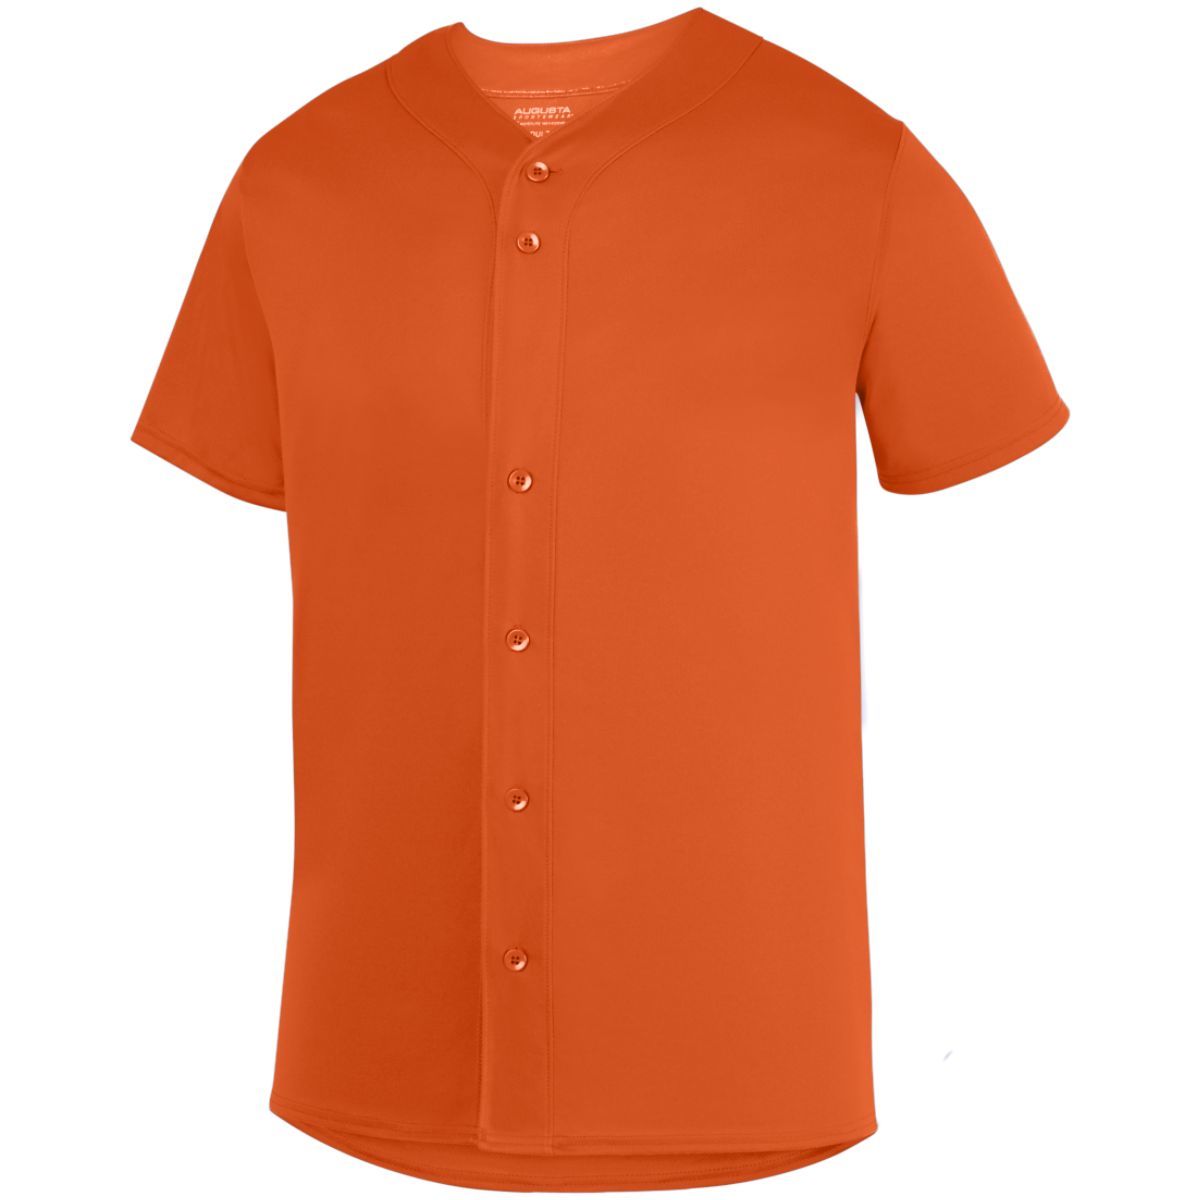 Augusta Sportswear Sultan Jersey in Orange  -Part of the Adult, Adult-Jersey, Augusta-Products, Baseball, Shirts, All-Sports, All-Sports-1 product lines at KanaleyCreations.com